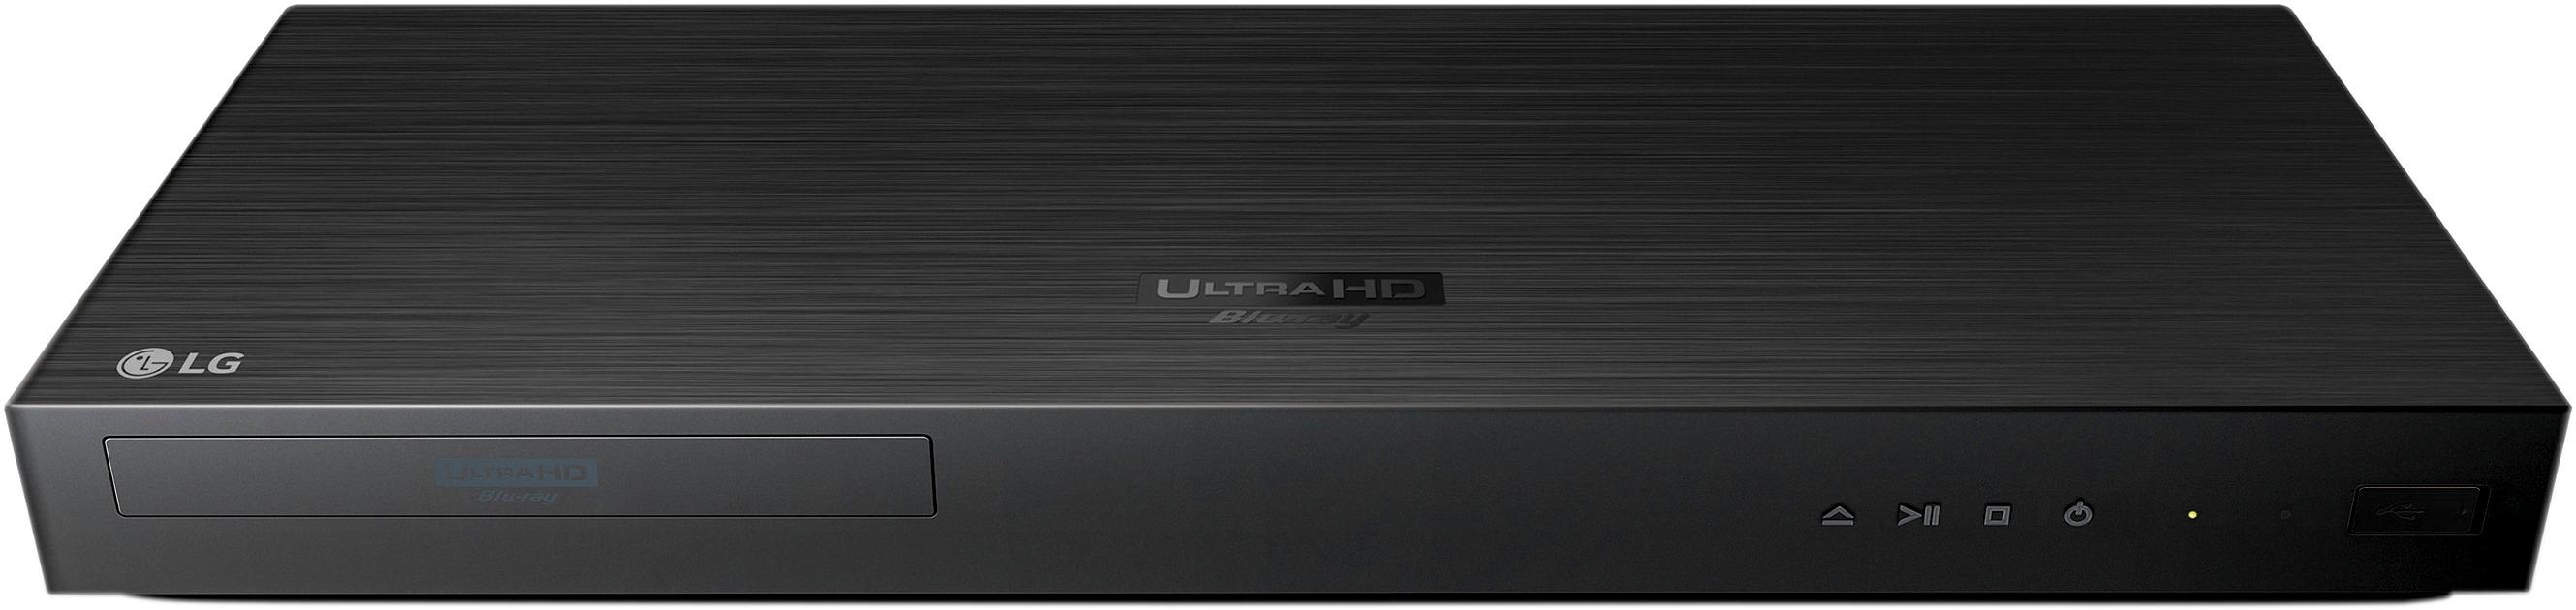 LG 4K Ultra HD Wi-Fi Built-in Blu-ray Player with HDR Compatibility (UP970)  - VIP Outlet